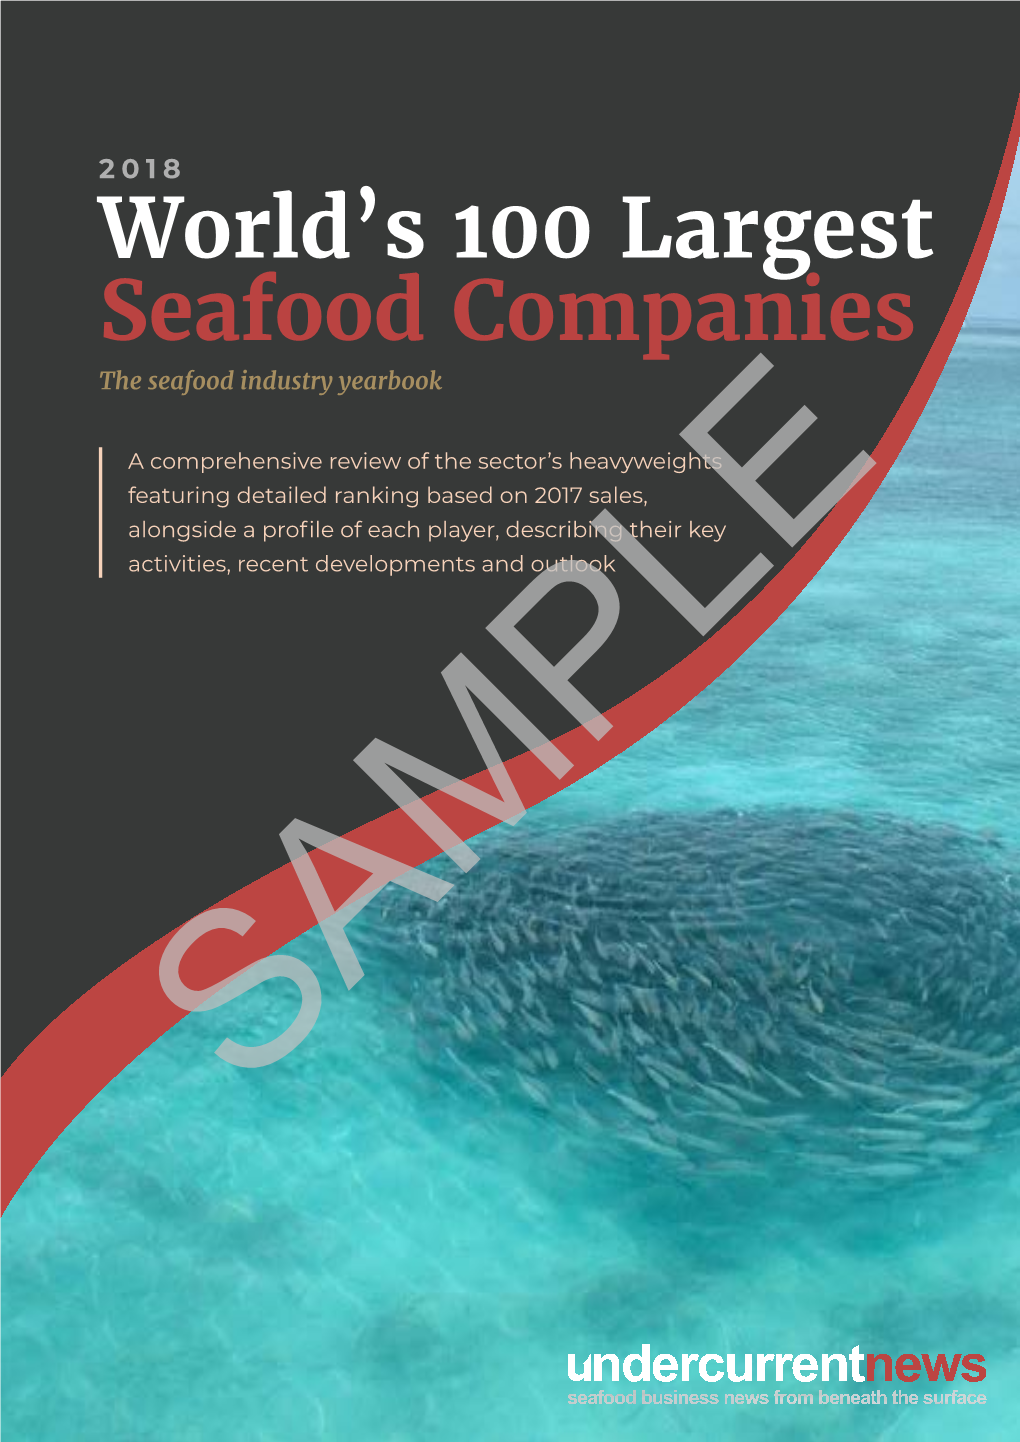 World's 100 Largest Seafood Companies